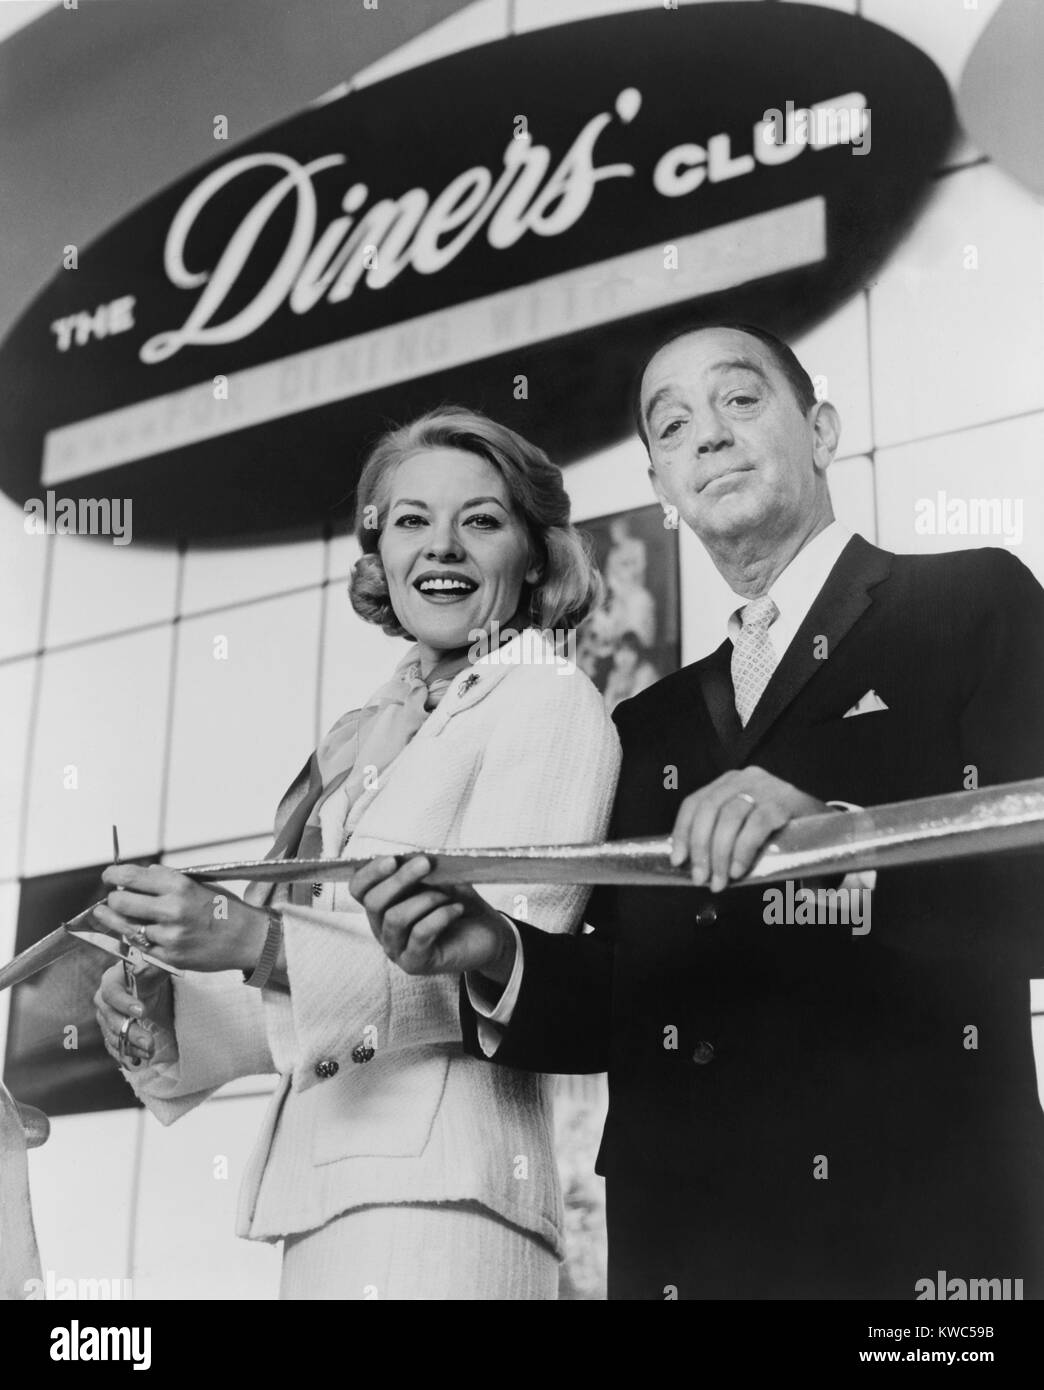 Ralph Schneider assists Patti Page cutting ribbon to open Diners' Club exhibit at 1964 World's Fair. Diners Club was the first independent credit card company in 1950. Schneider co-founded the company with Frank McNamara, who sold out his interest in 1952. (BSLOC 2015 14 152) Stock Photo